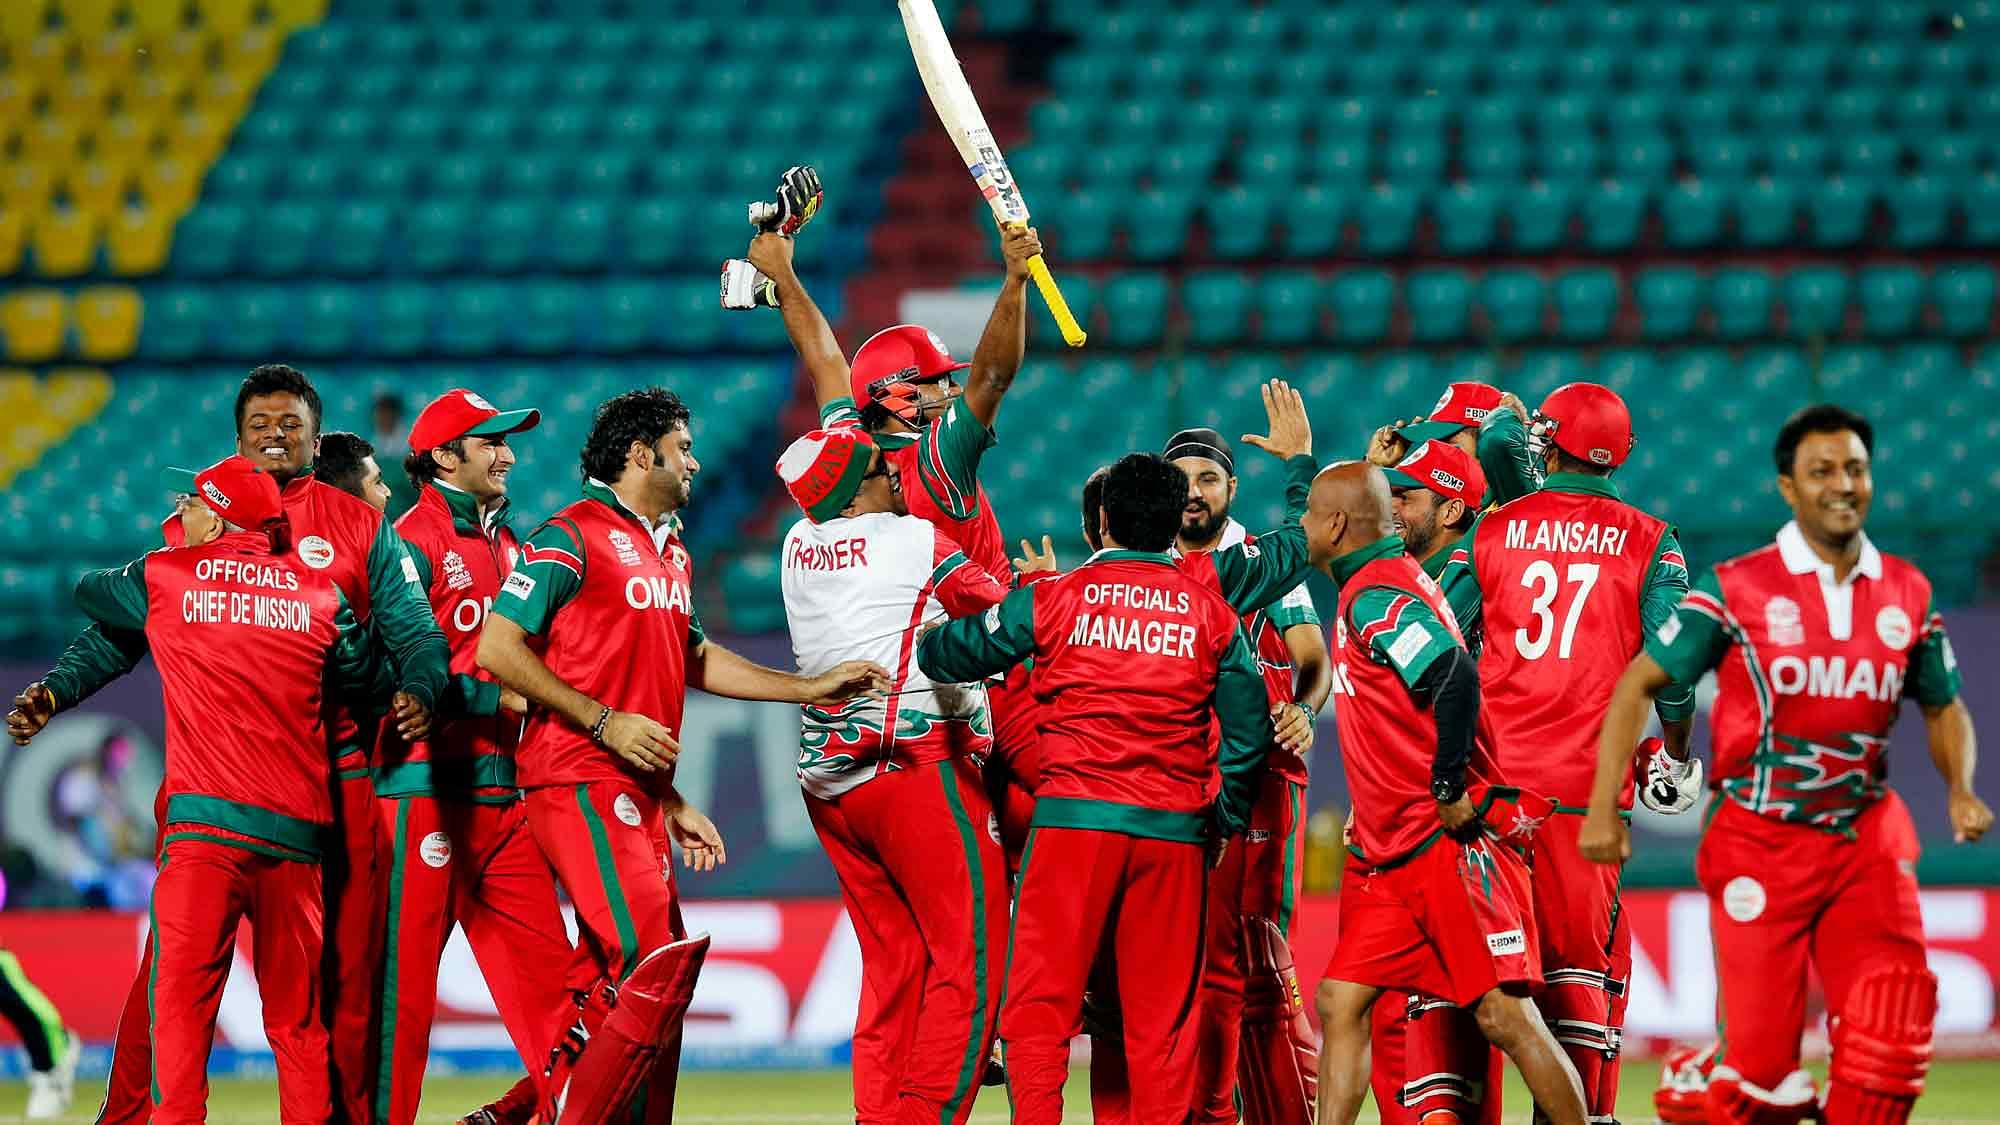 Oman players celebrate after the shock victory over Ireland. (Photo: AP)